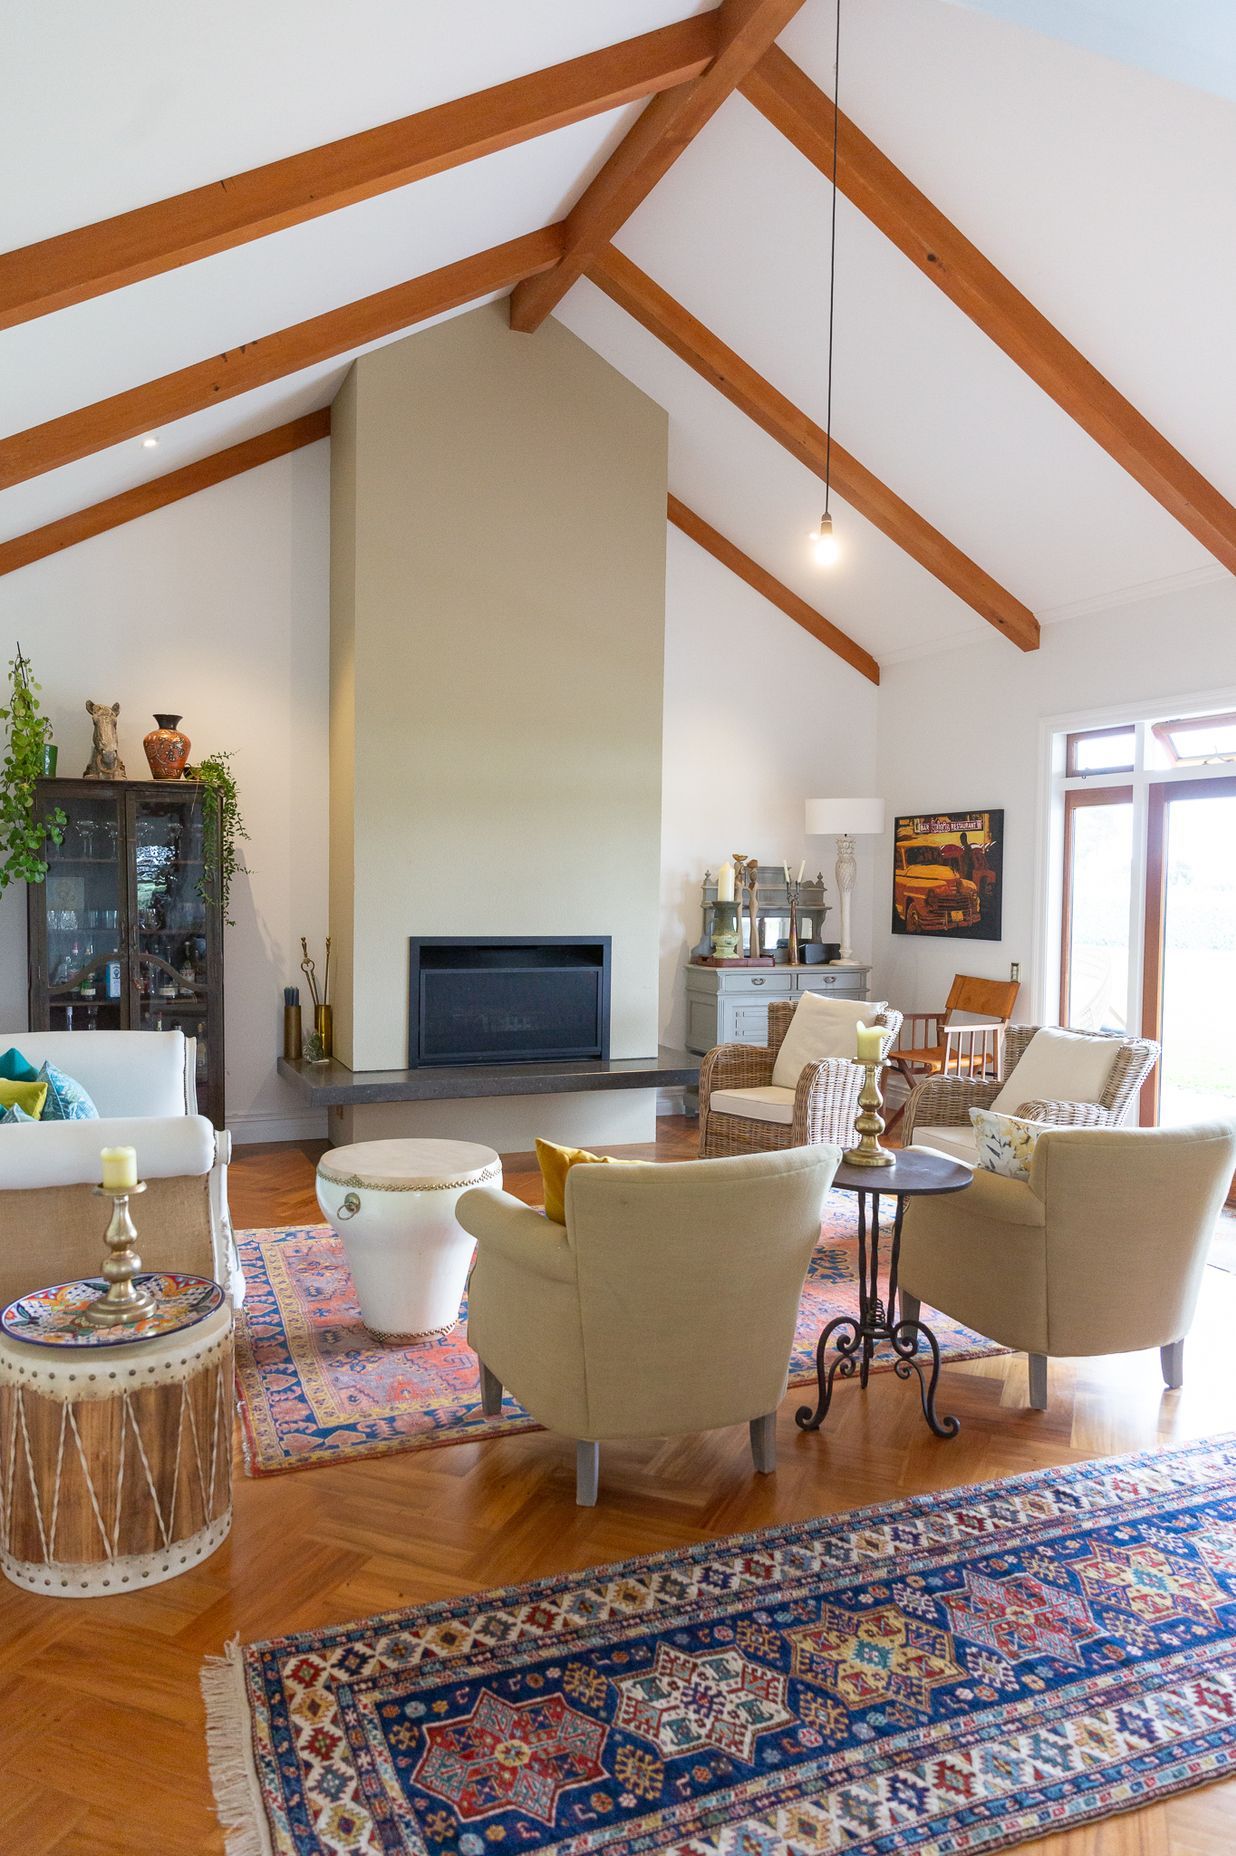 beautiful timber beams highlight the angles in the lounge room ceiling